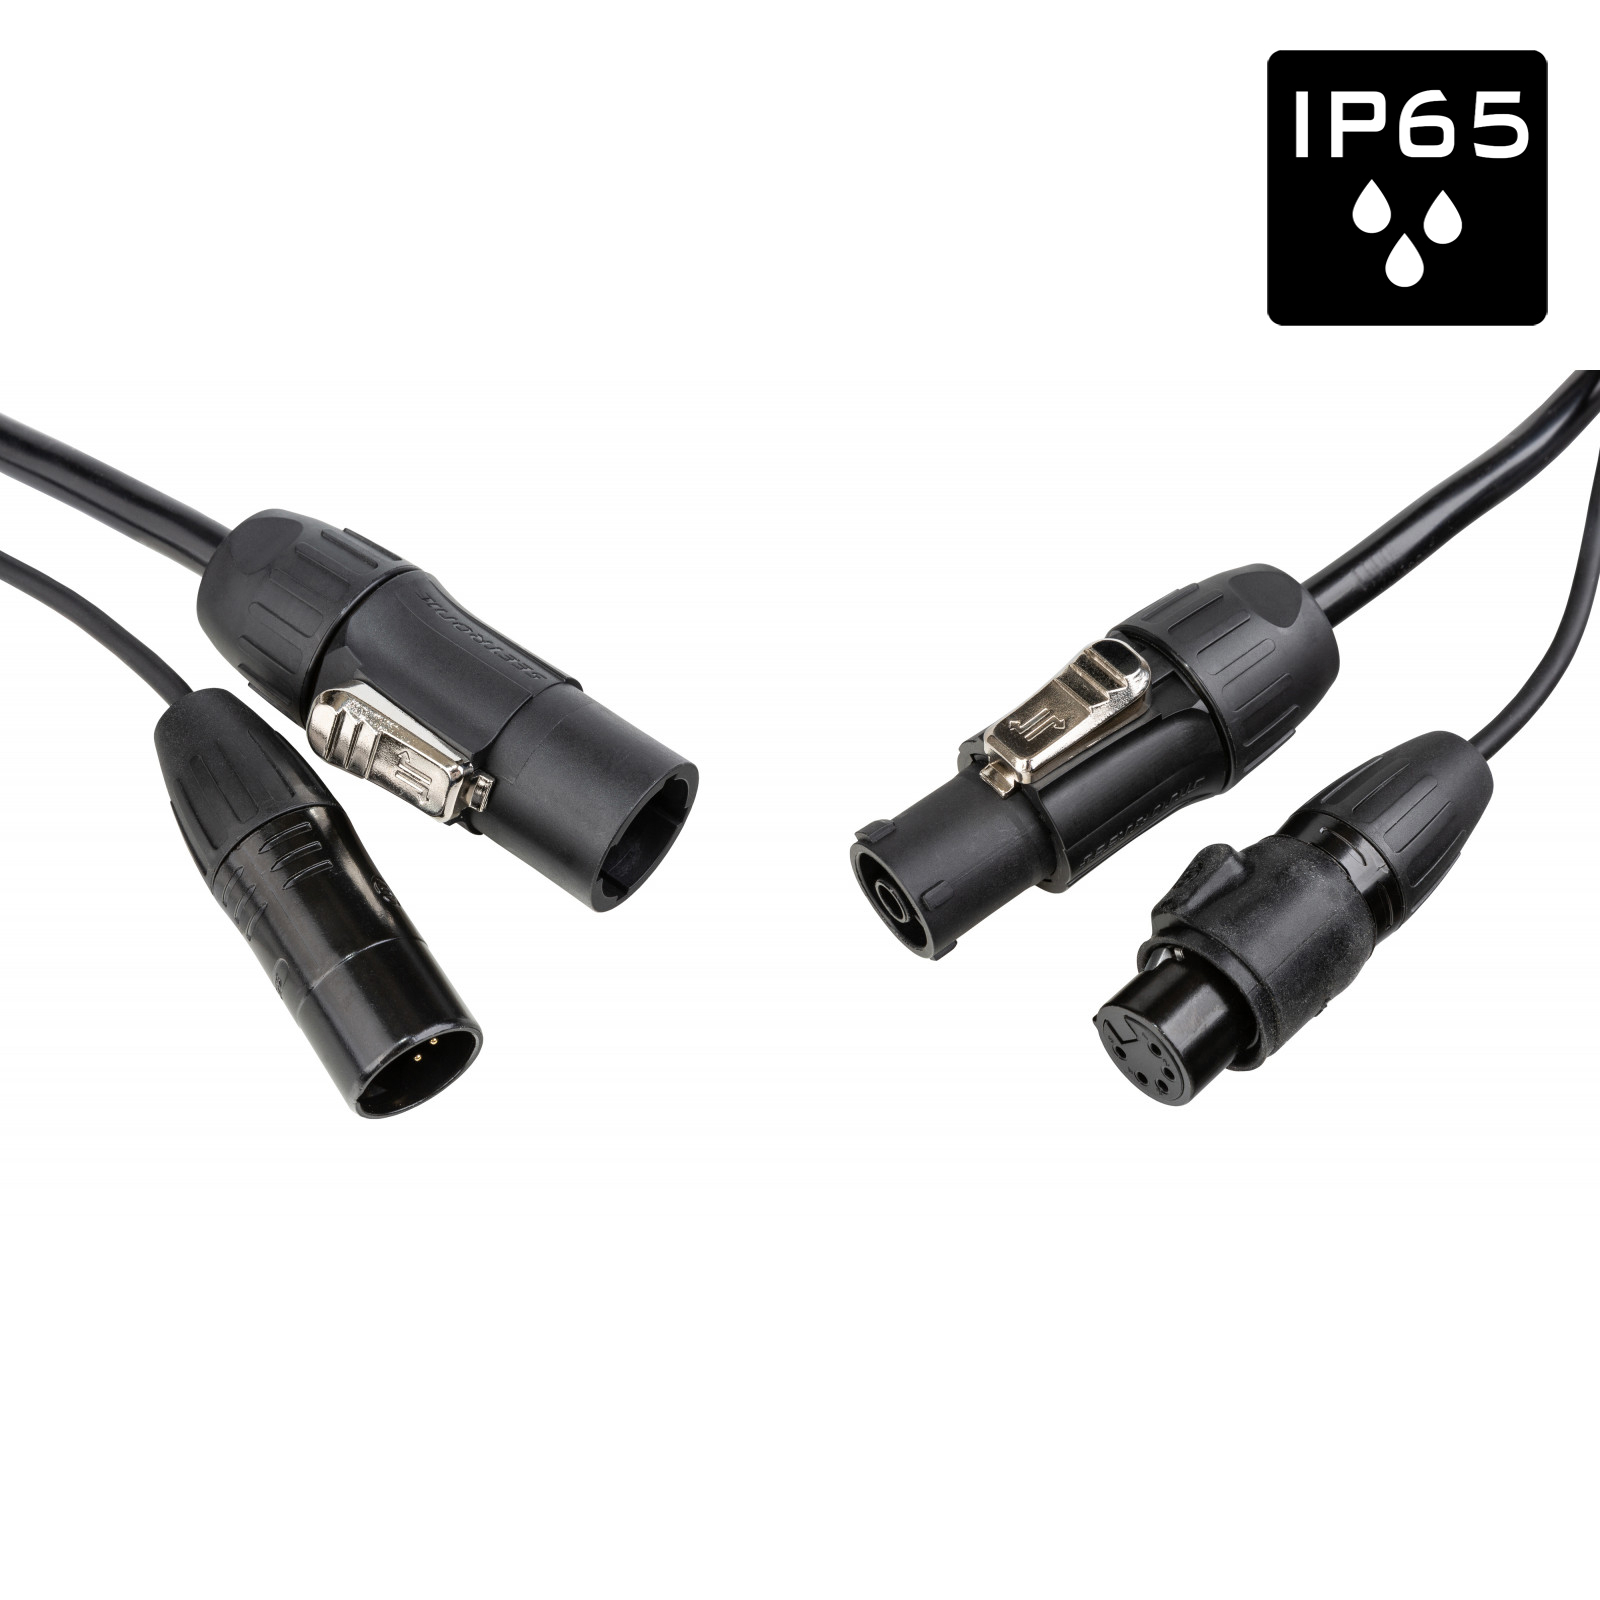 IP65 Outdoor combi cable with Seetronic XLR 5pin and True1 compatible connectors - Length 5m